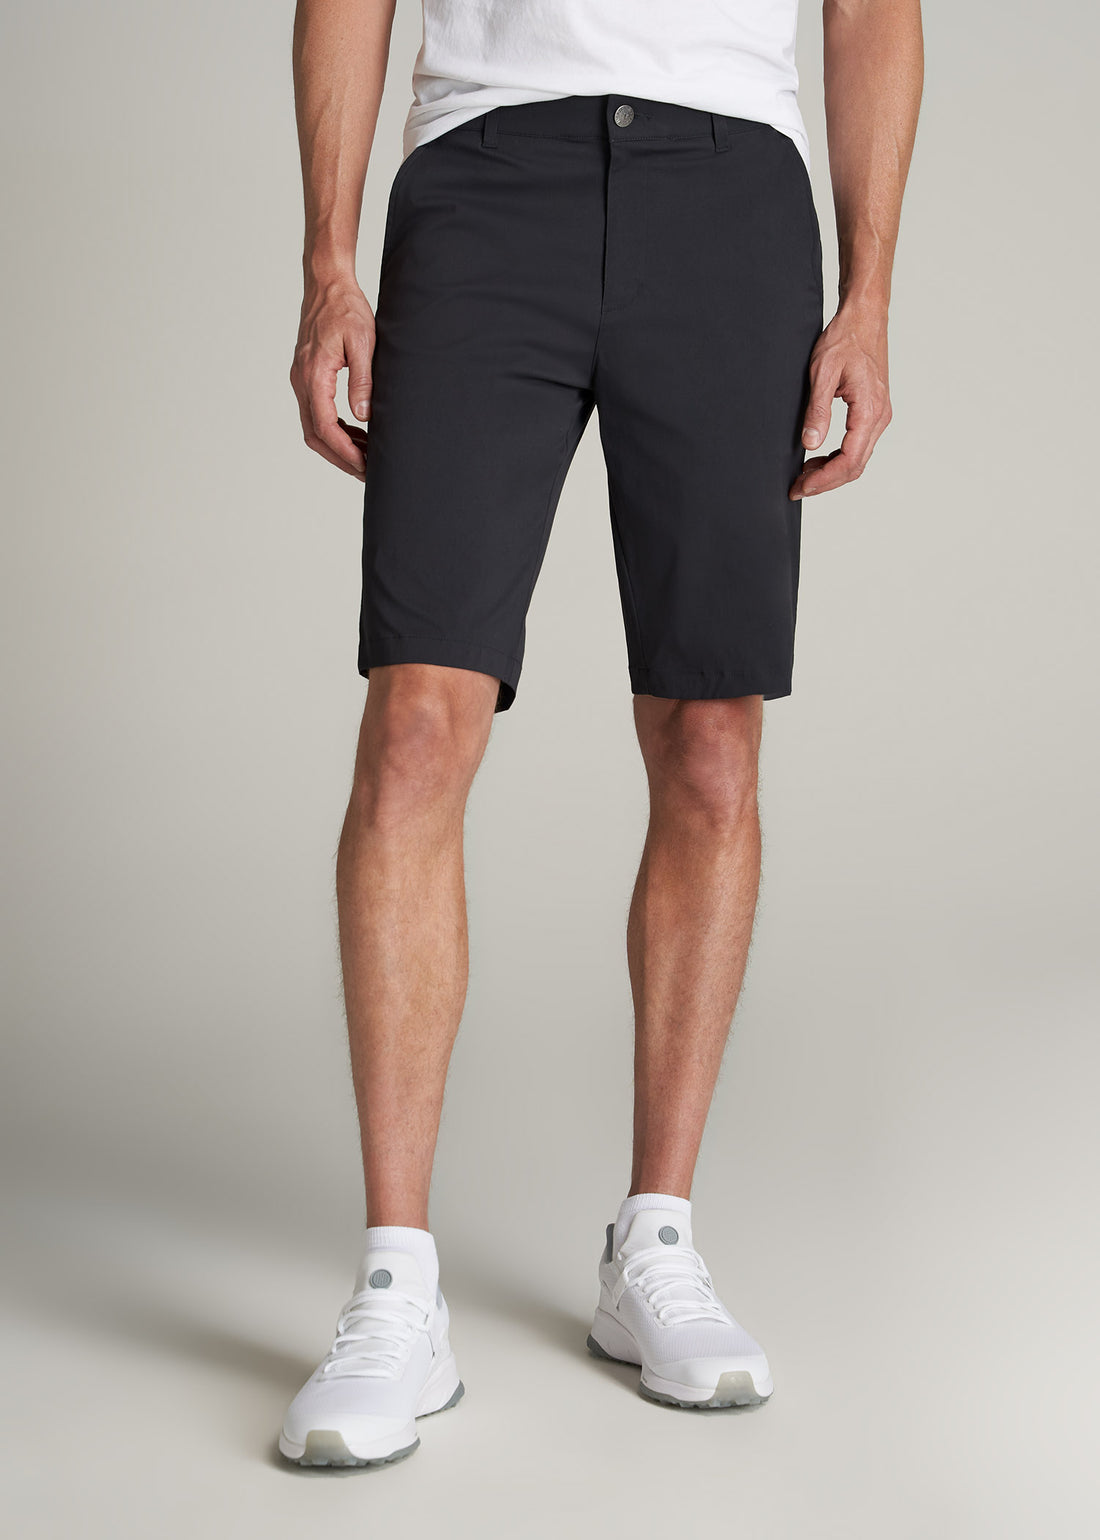 Essential Summer Clothing for Tall Men, 2tall Blog